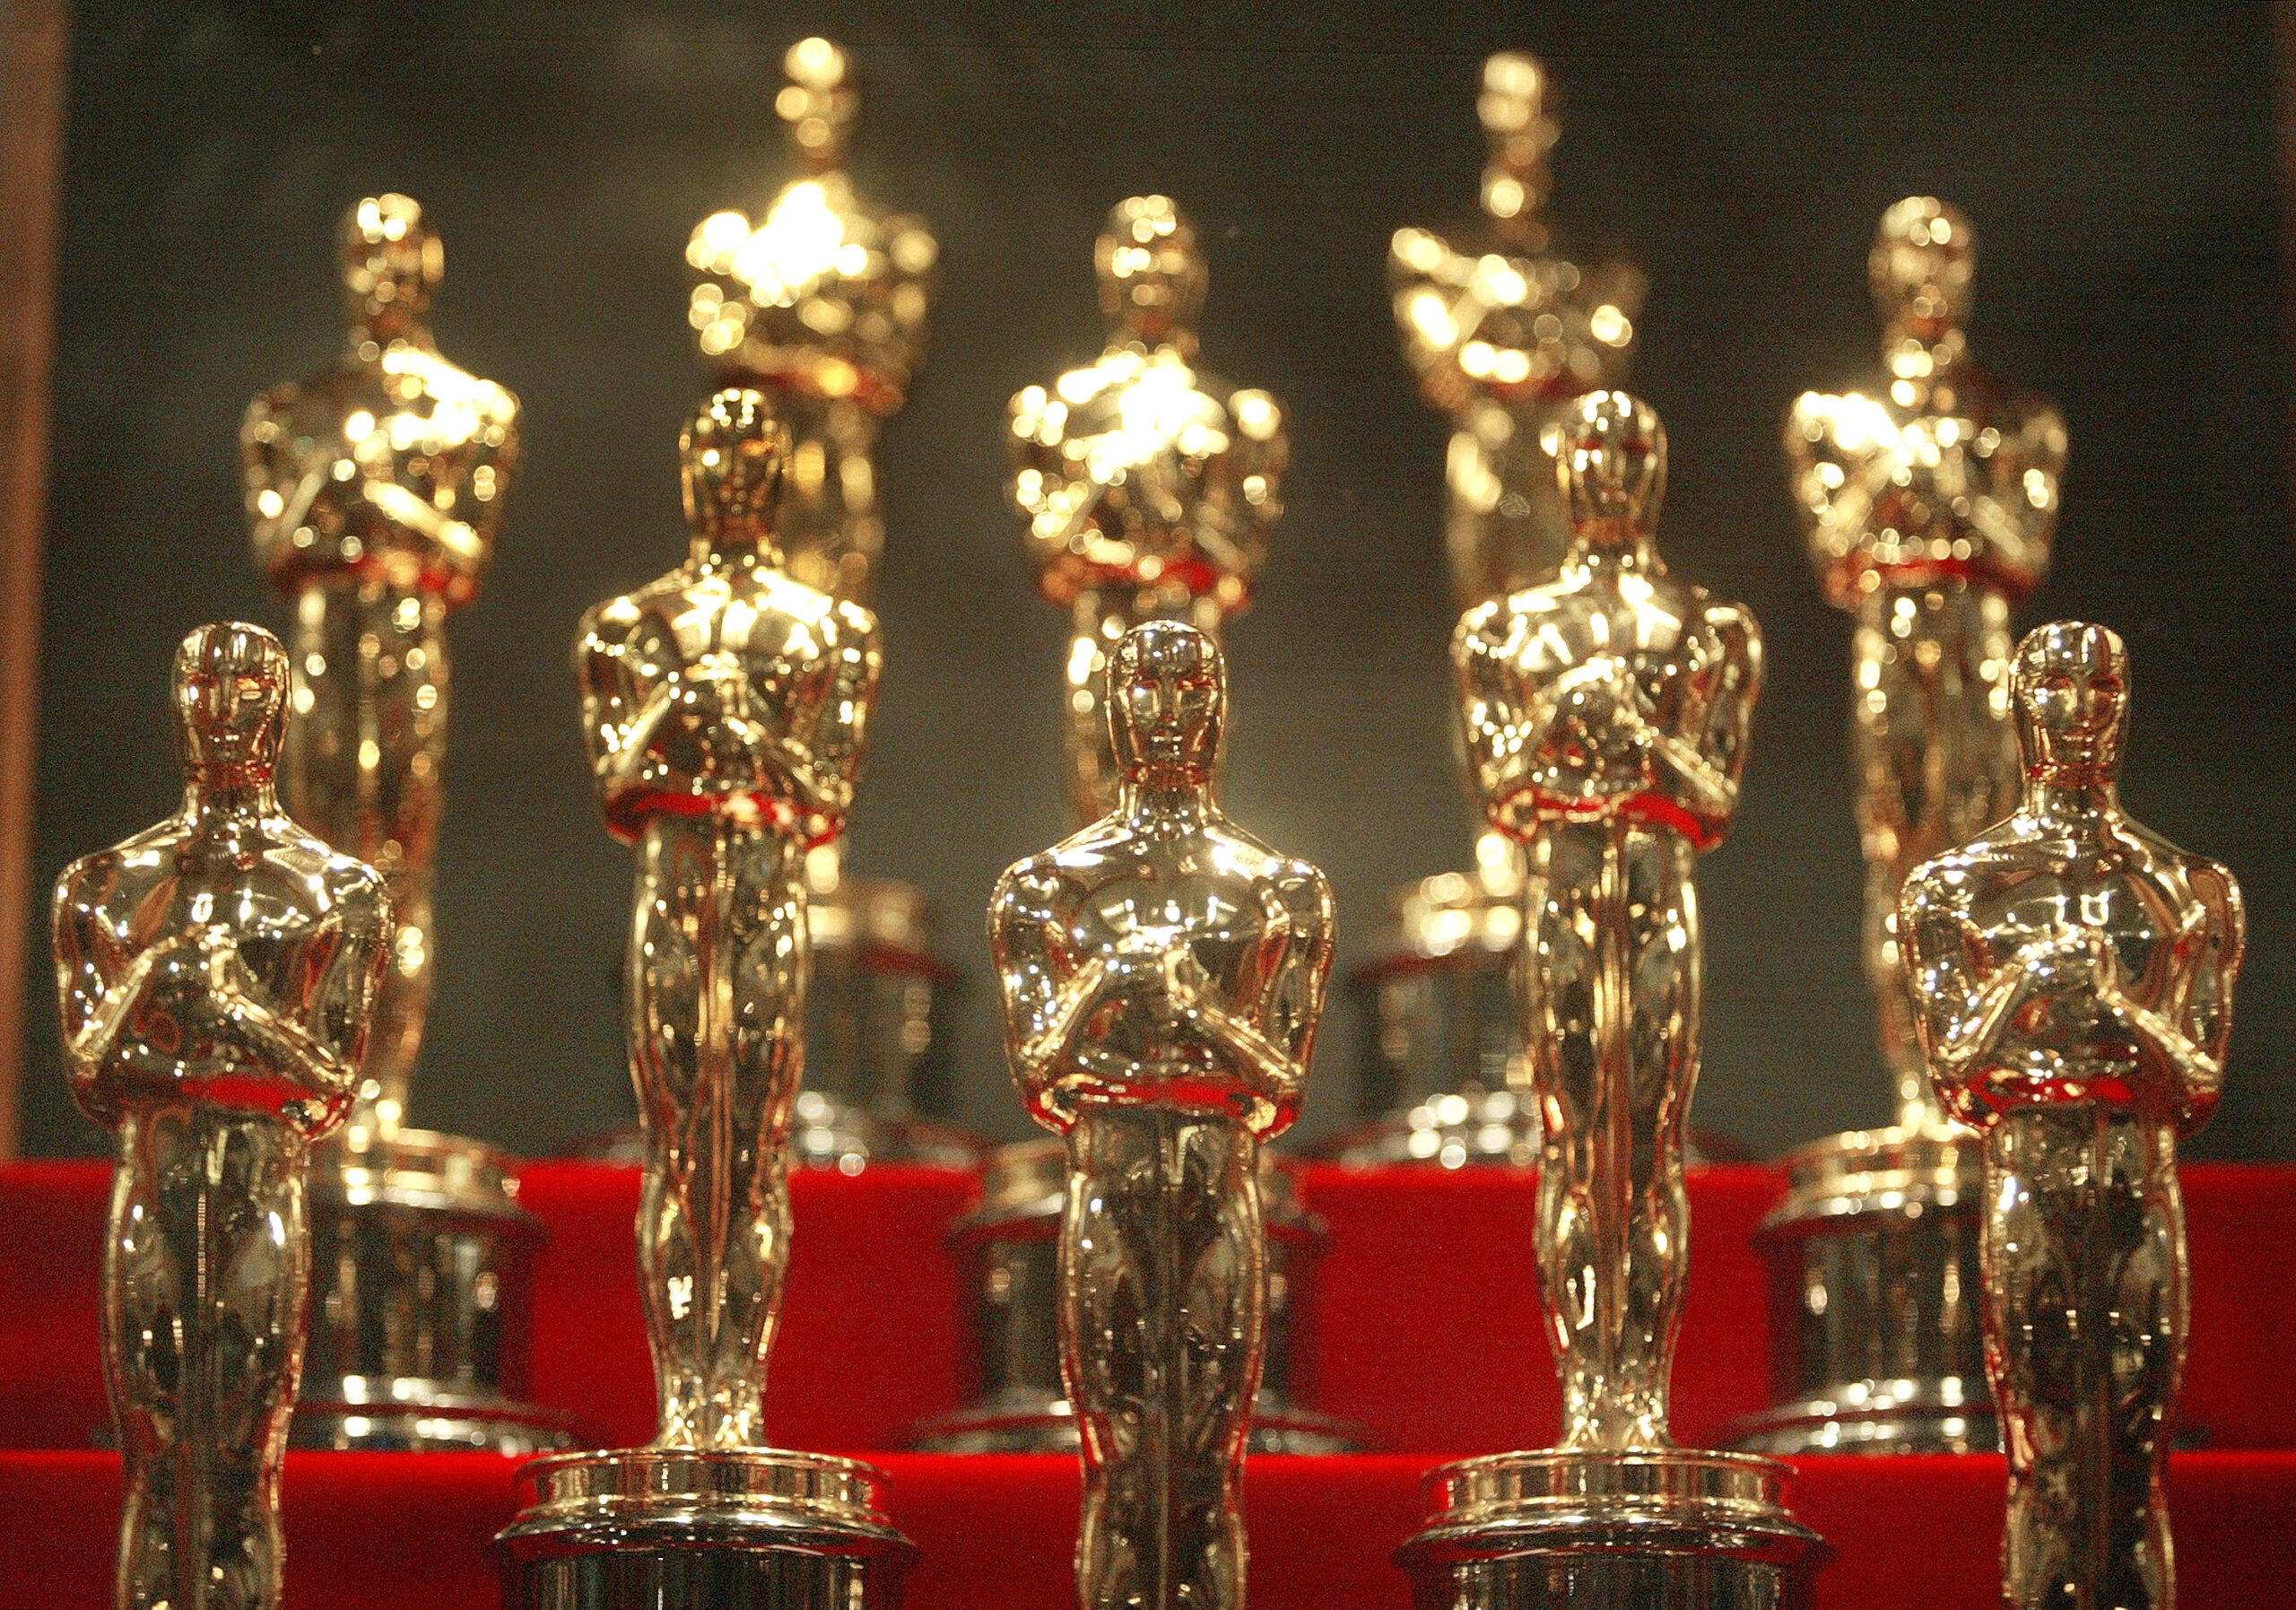 Oscar statuettes are displayed during an unveiling of the 50 Oscar statuettes to be awarded at the 76th Academy Awards ceremony (Photo Credit: Tim Boyle/Getty Images)